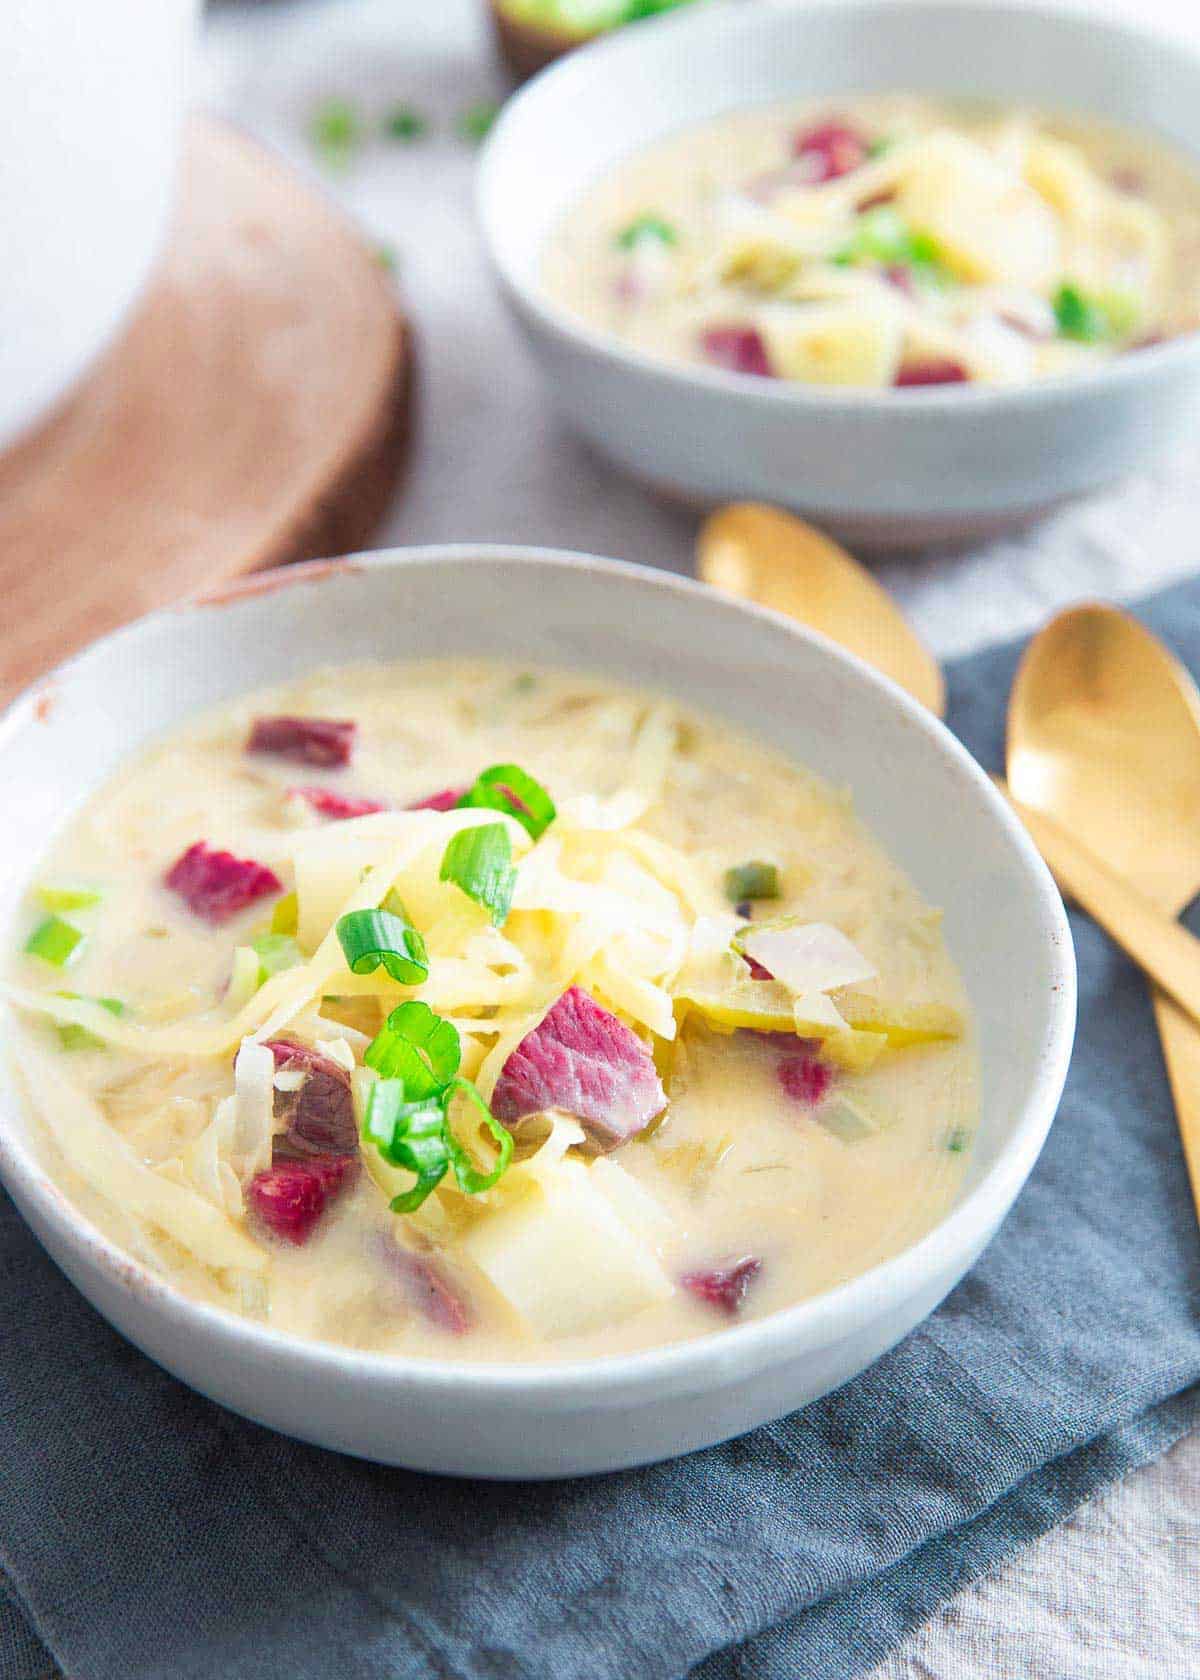 Reuben soup combines corned beef, potatoes, sauerkraut and Swiss cheese in a simple creamy dish. It's the perfect way to use up St. Patrick's Day leftovers!